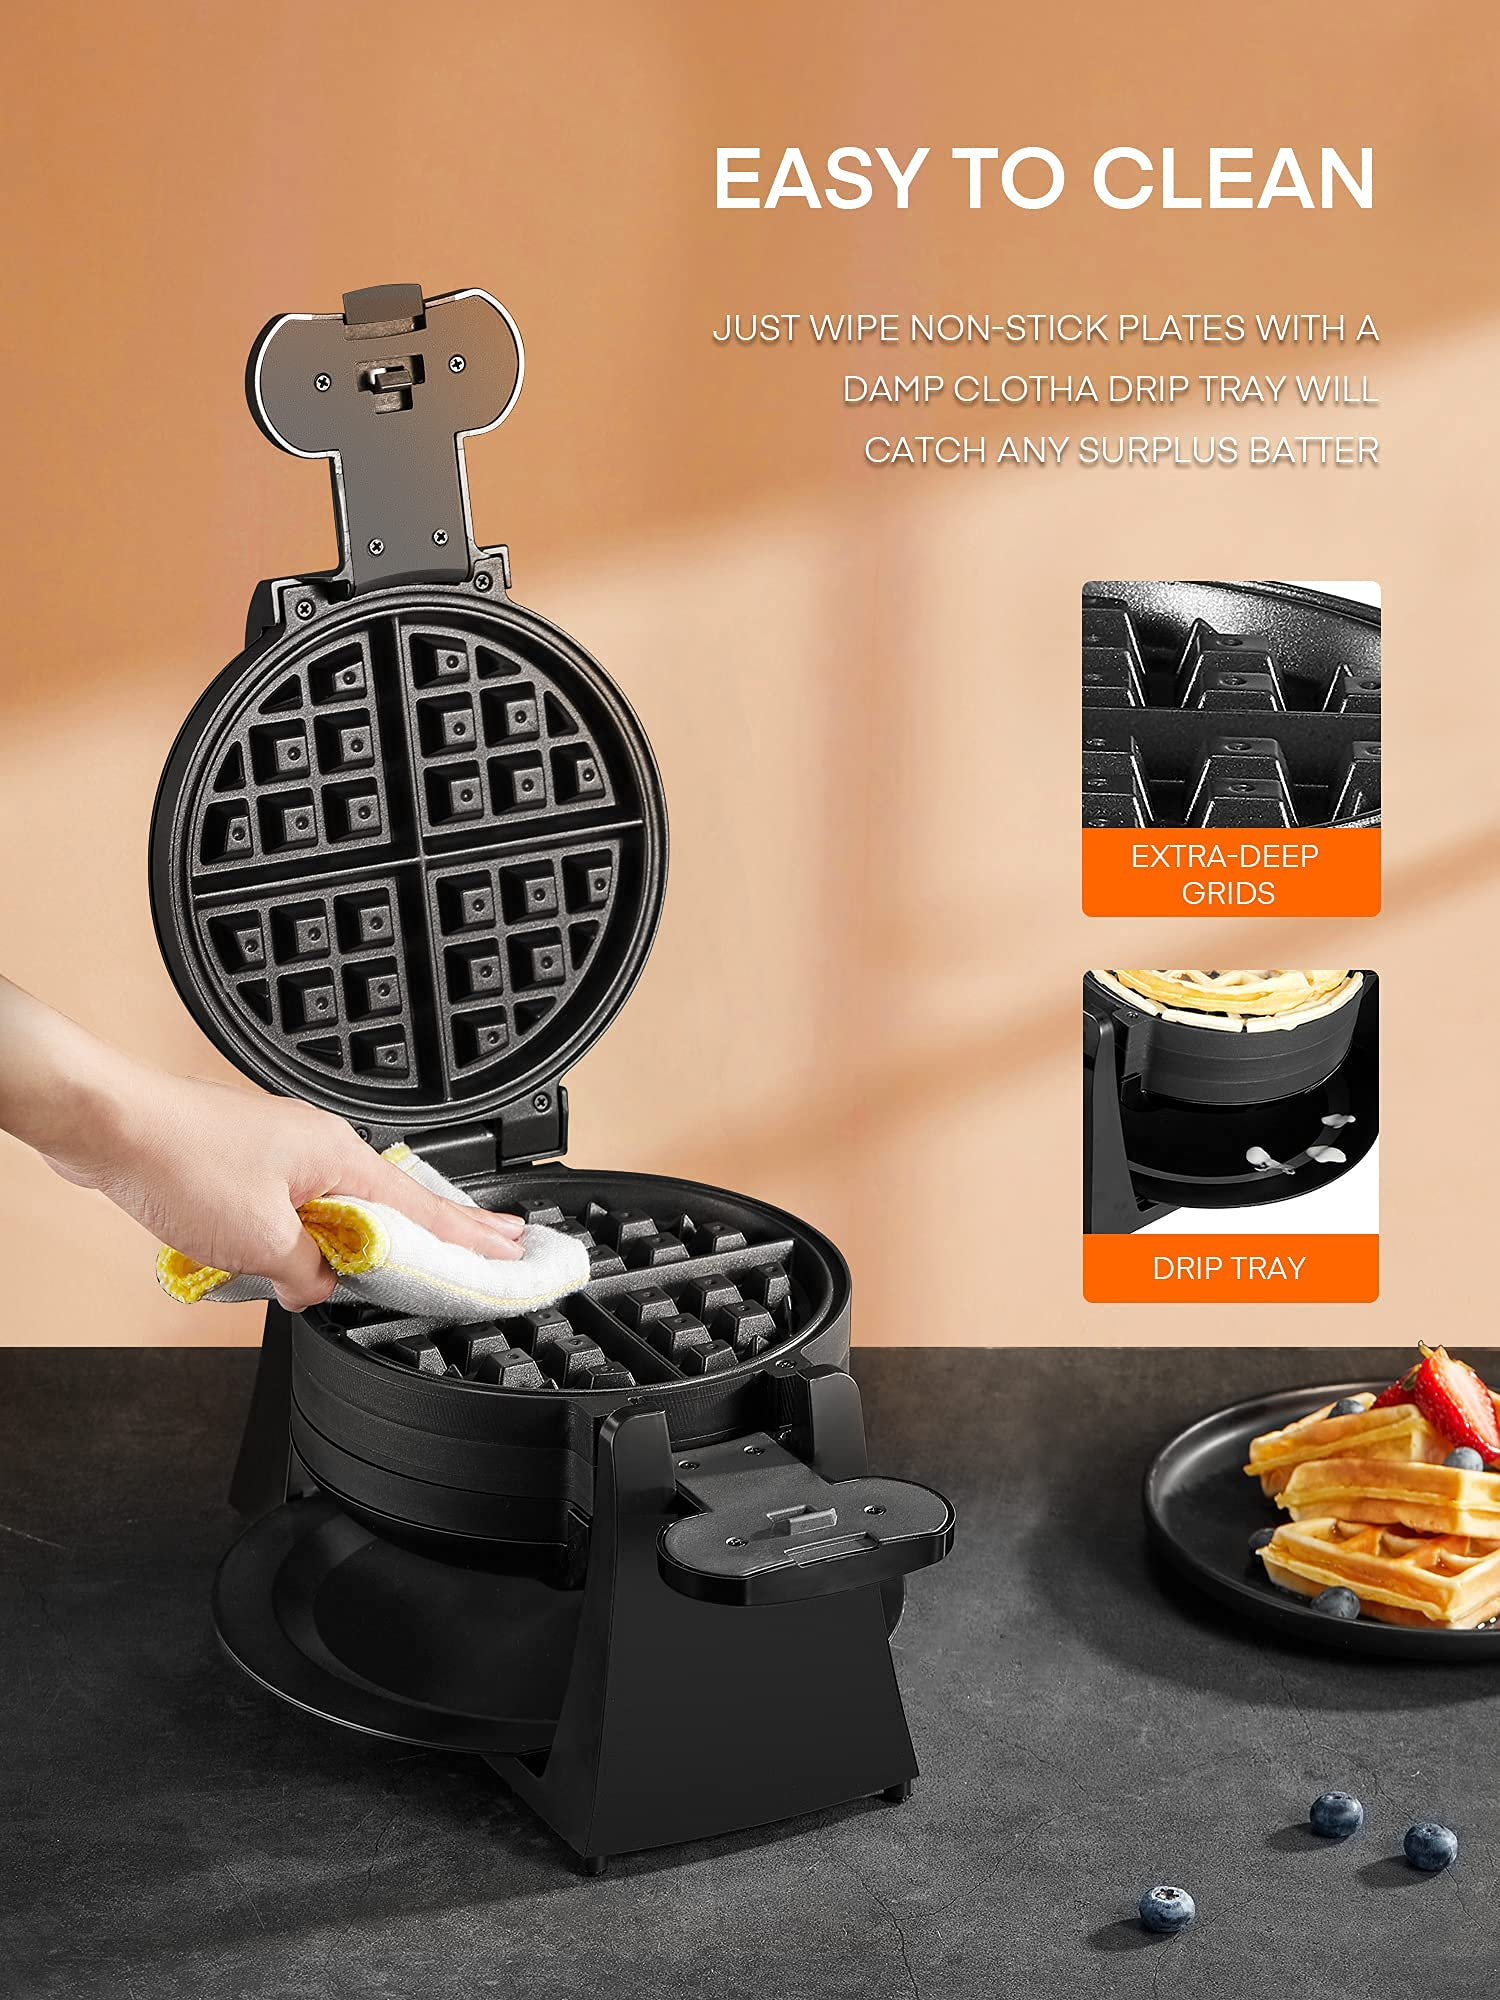 Double Waffle Maker 180° Flip, Belgian Waffle Iron 8 Slices One Time,  Nonstick Plates, Removable Drip Tray & Rotating, 1400W Adjustable  Temperature Control Cool Touch Handle, Black – AICOOK